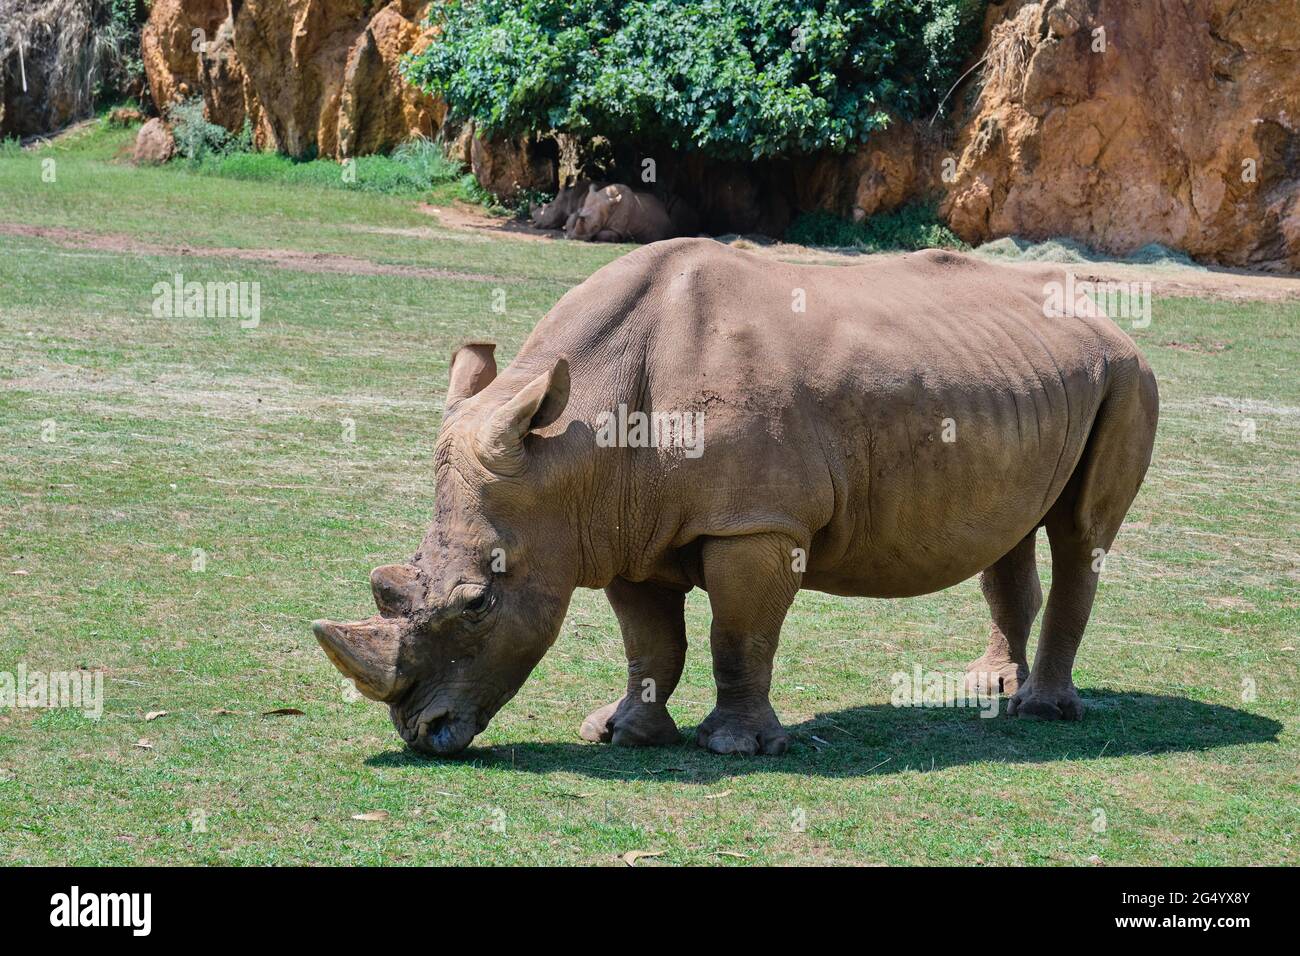 A rhinoceros eating grass in Cabarceno Natural Park in Cantabria, Spain. Stock Photo